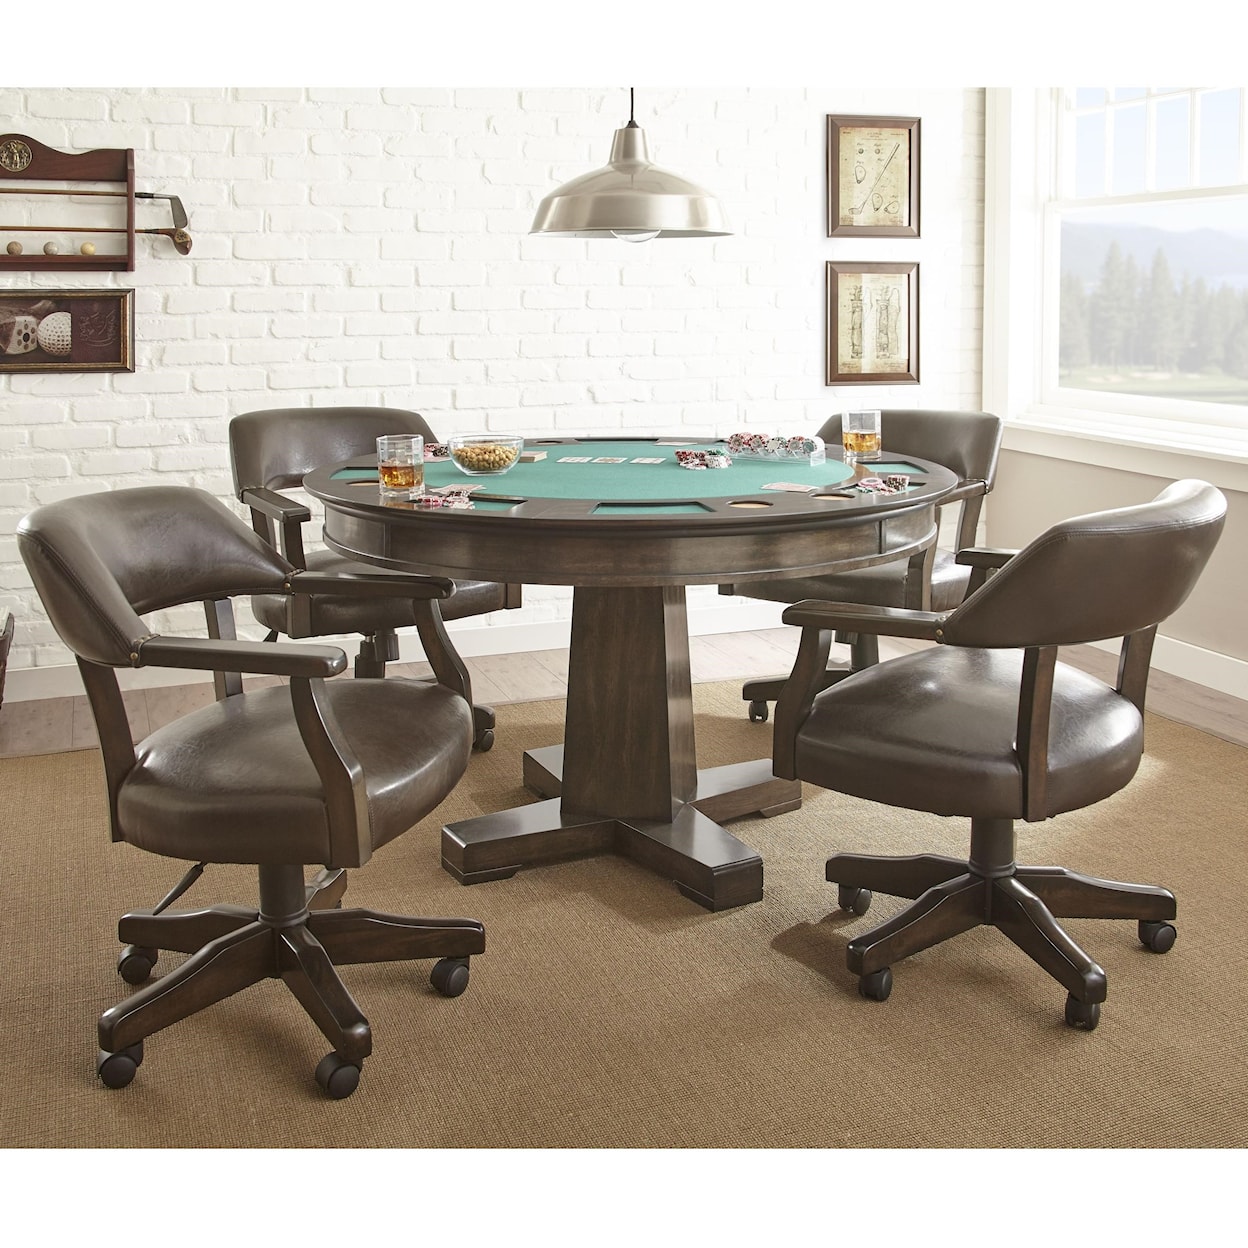 Steve Silver Ruby Game Table Set